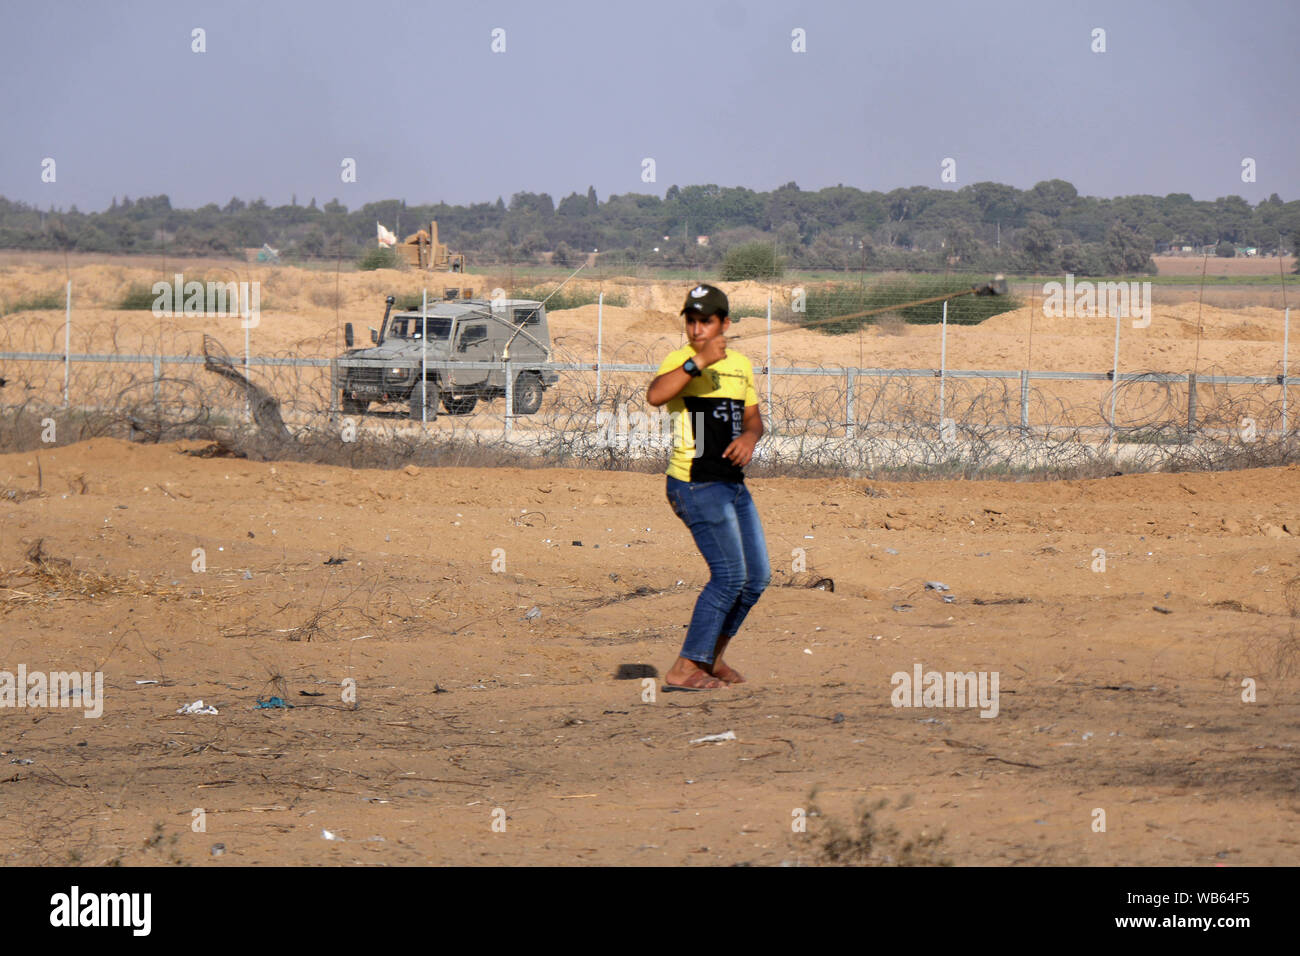 Khan Younis, Gaza Strip, Palestinian Territory. 23rd Aug, 2019. Palestinian protesters clash with Israeli troops following the tents protest where Palestinians demand the right to return to their homeland at the Israel-Gaza border. Credit: Mariam Dagga/APA Images/ZUMA Wire/Alamy Live News Stock Photo